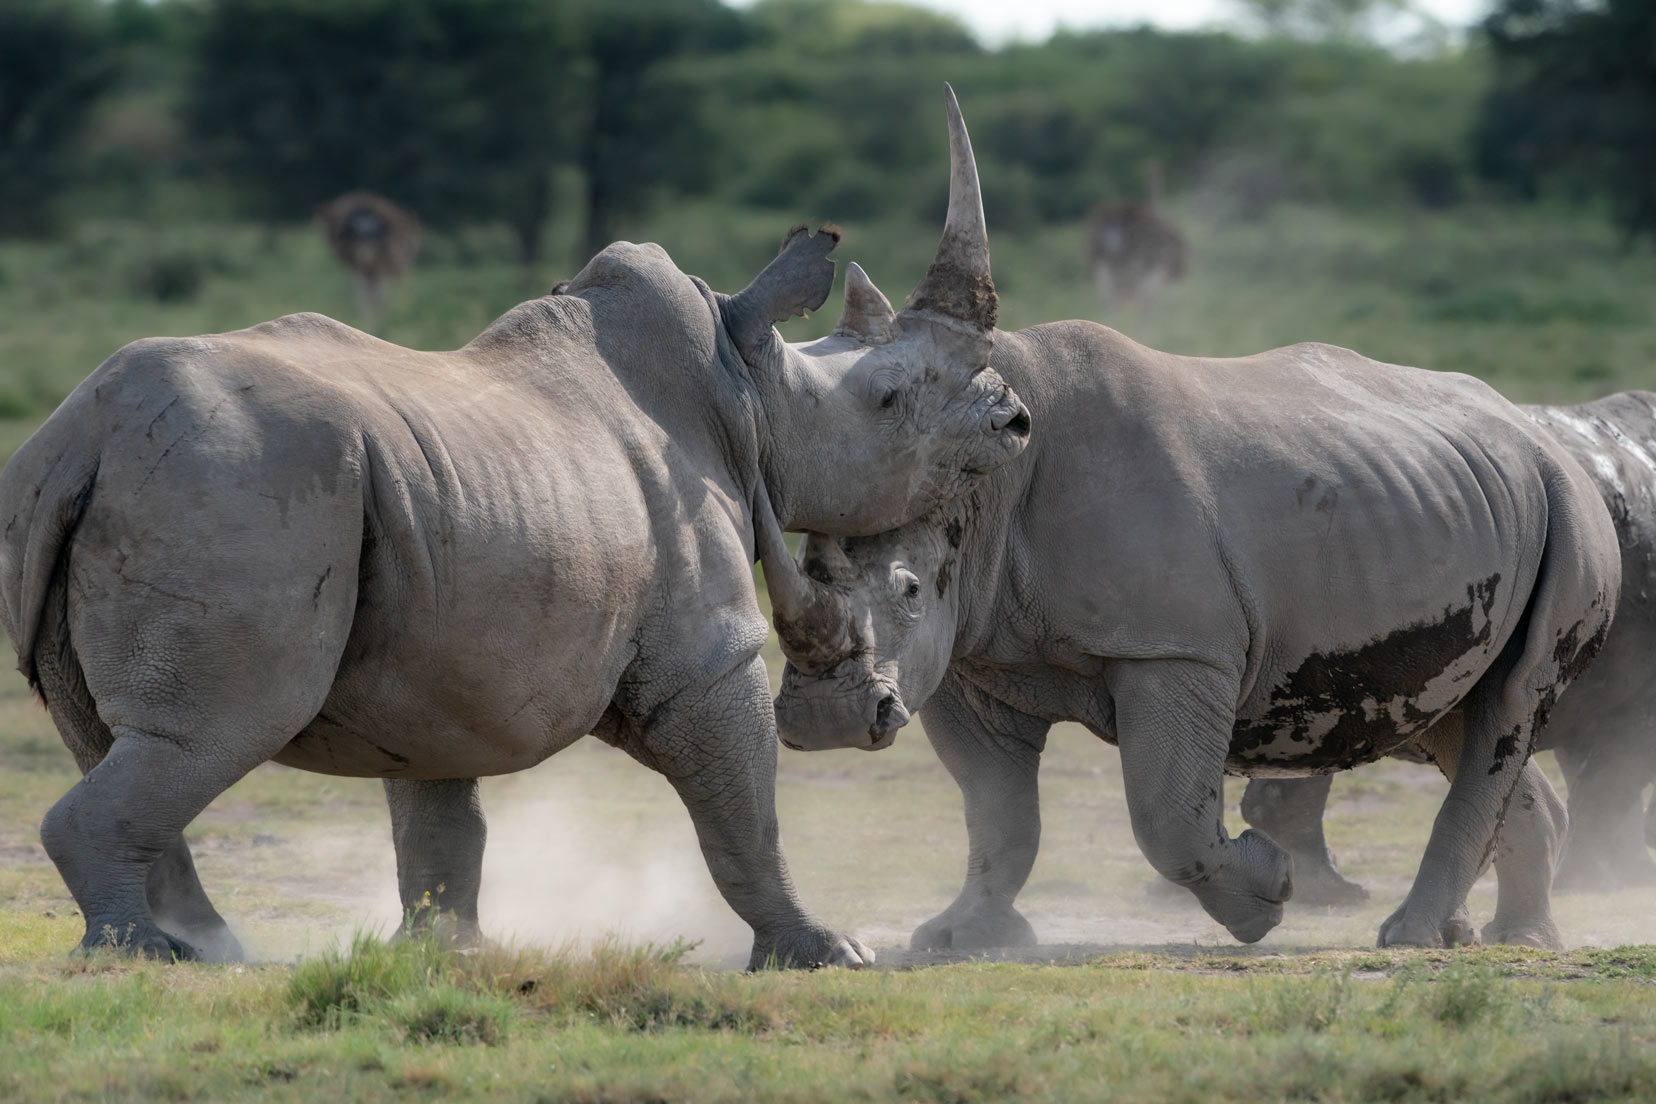 two black rhinos fight with their long horns